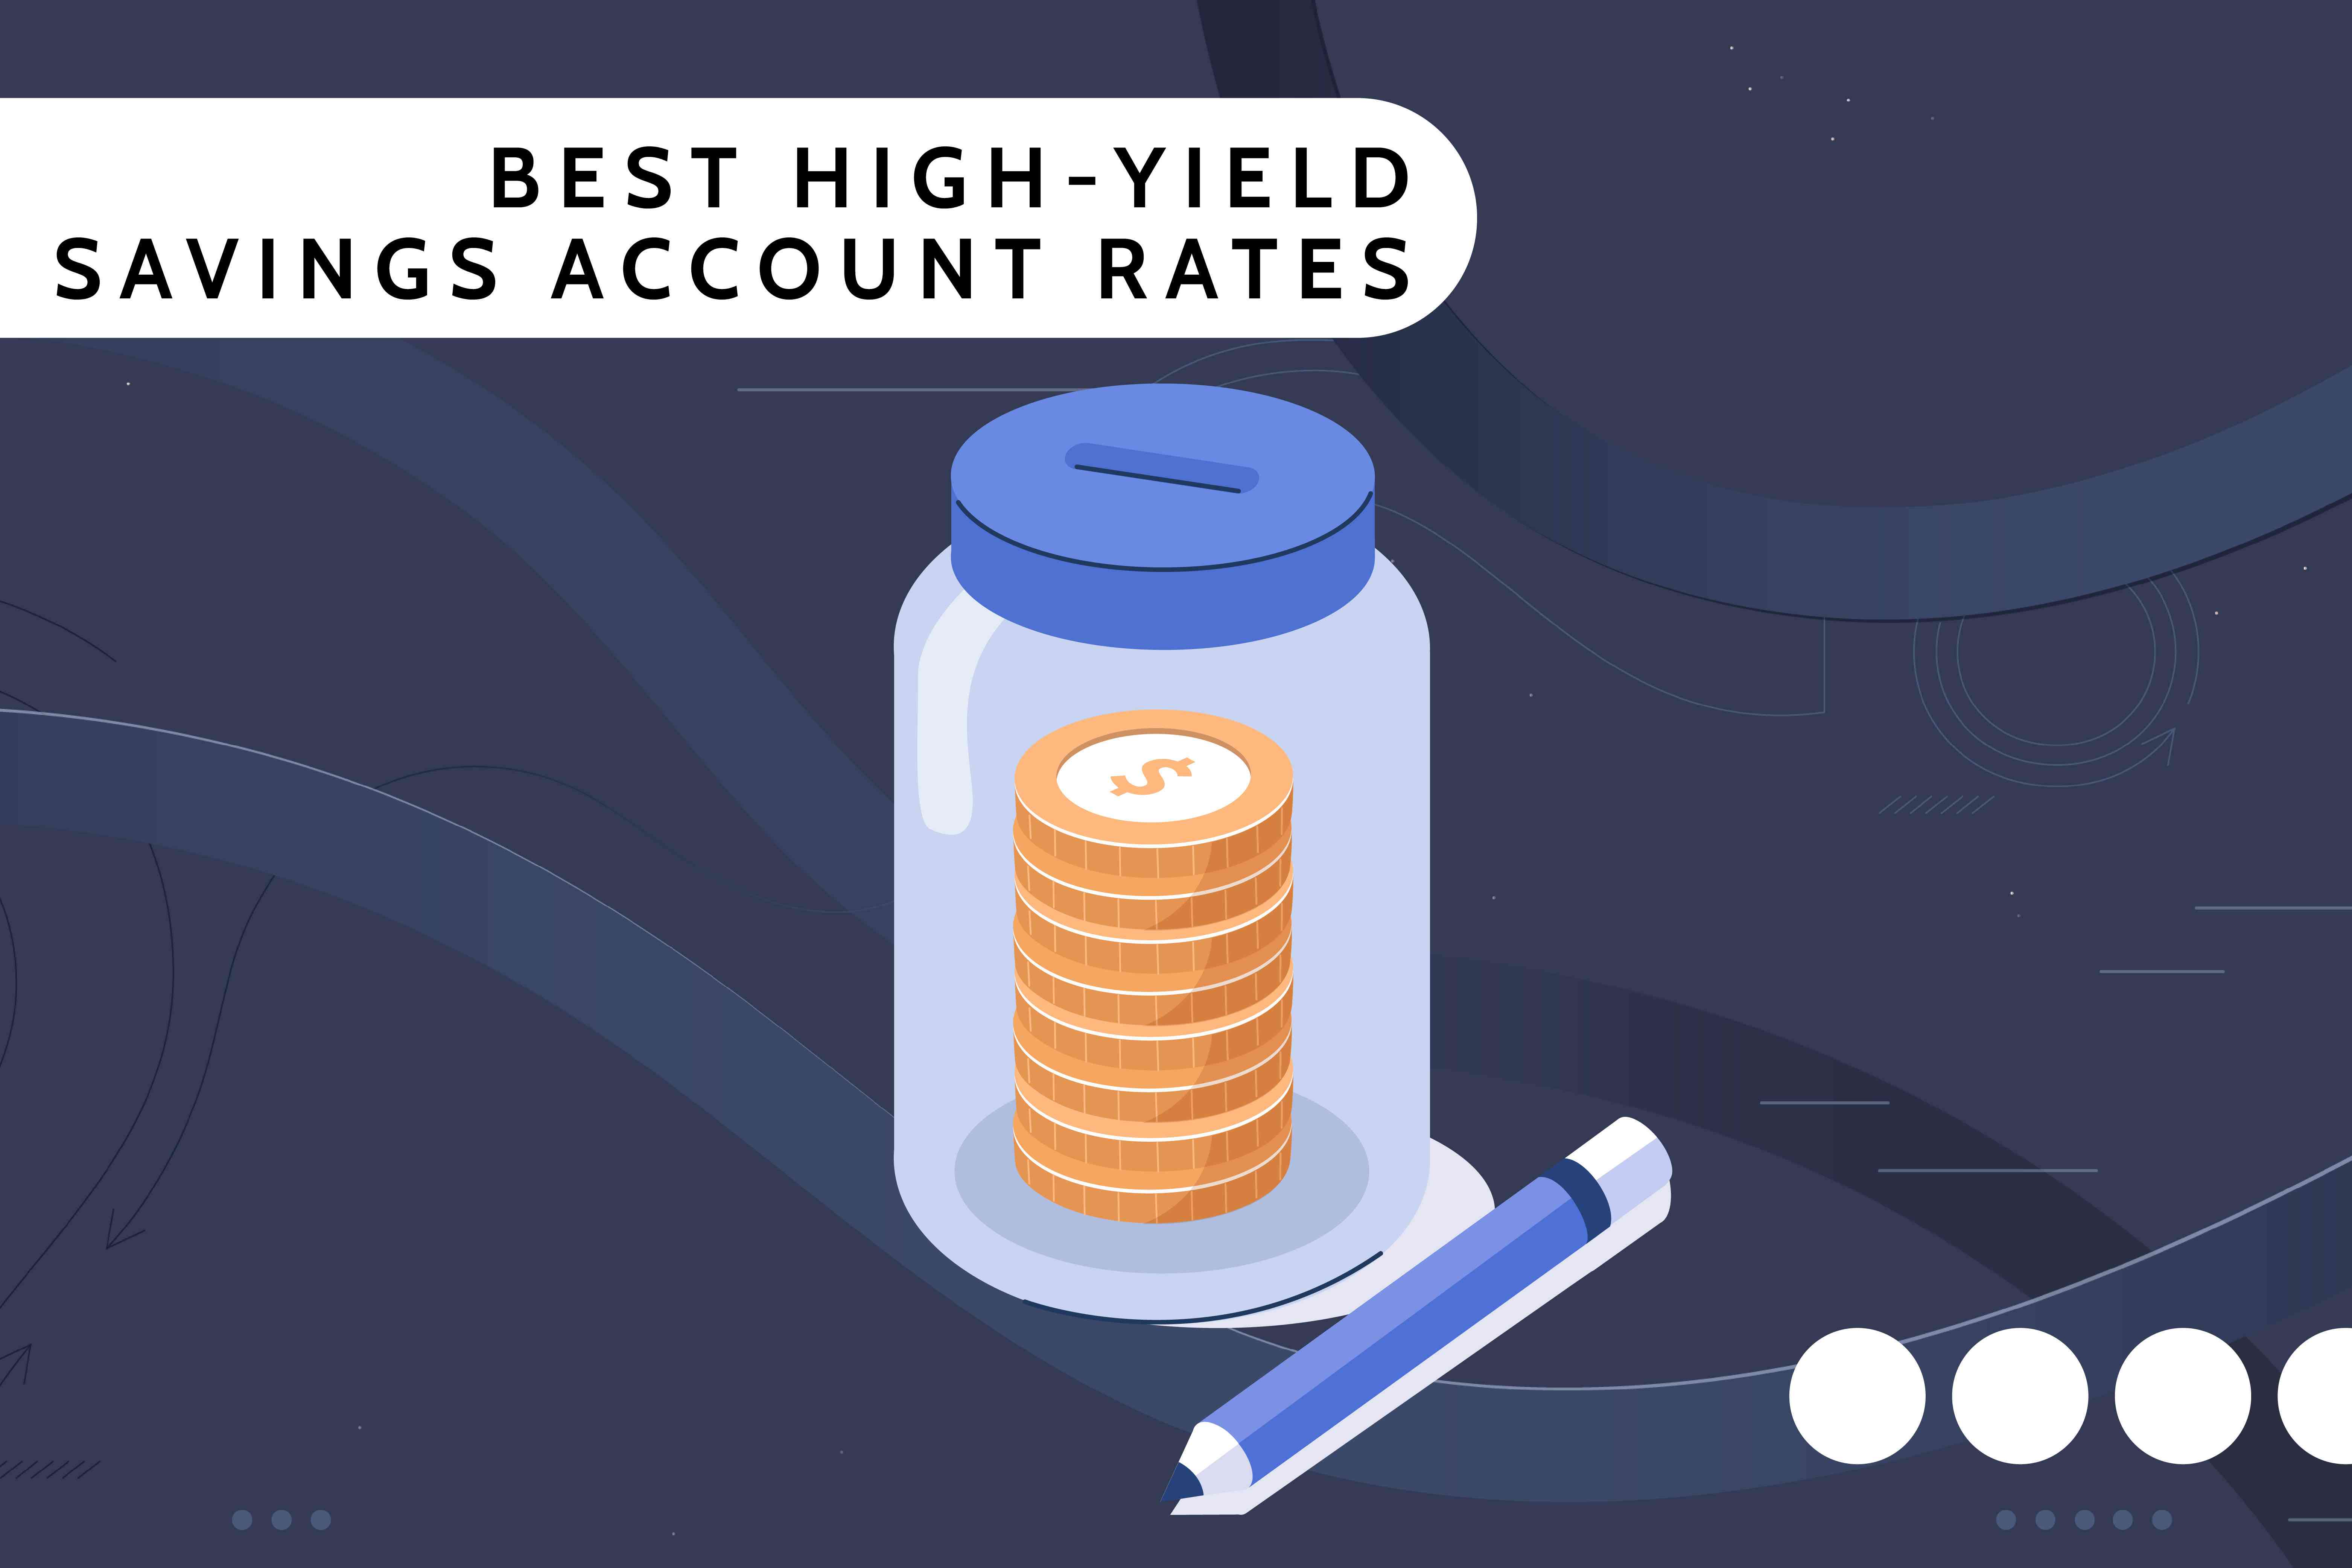 Investopedia custom asset that shows a change jar, with the title "best high-yield savings account rates"